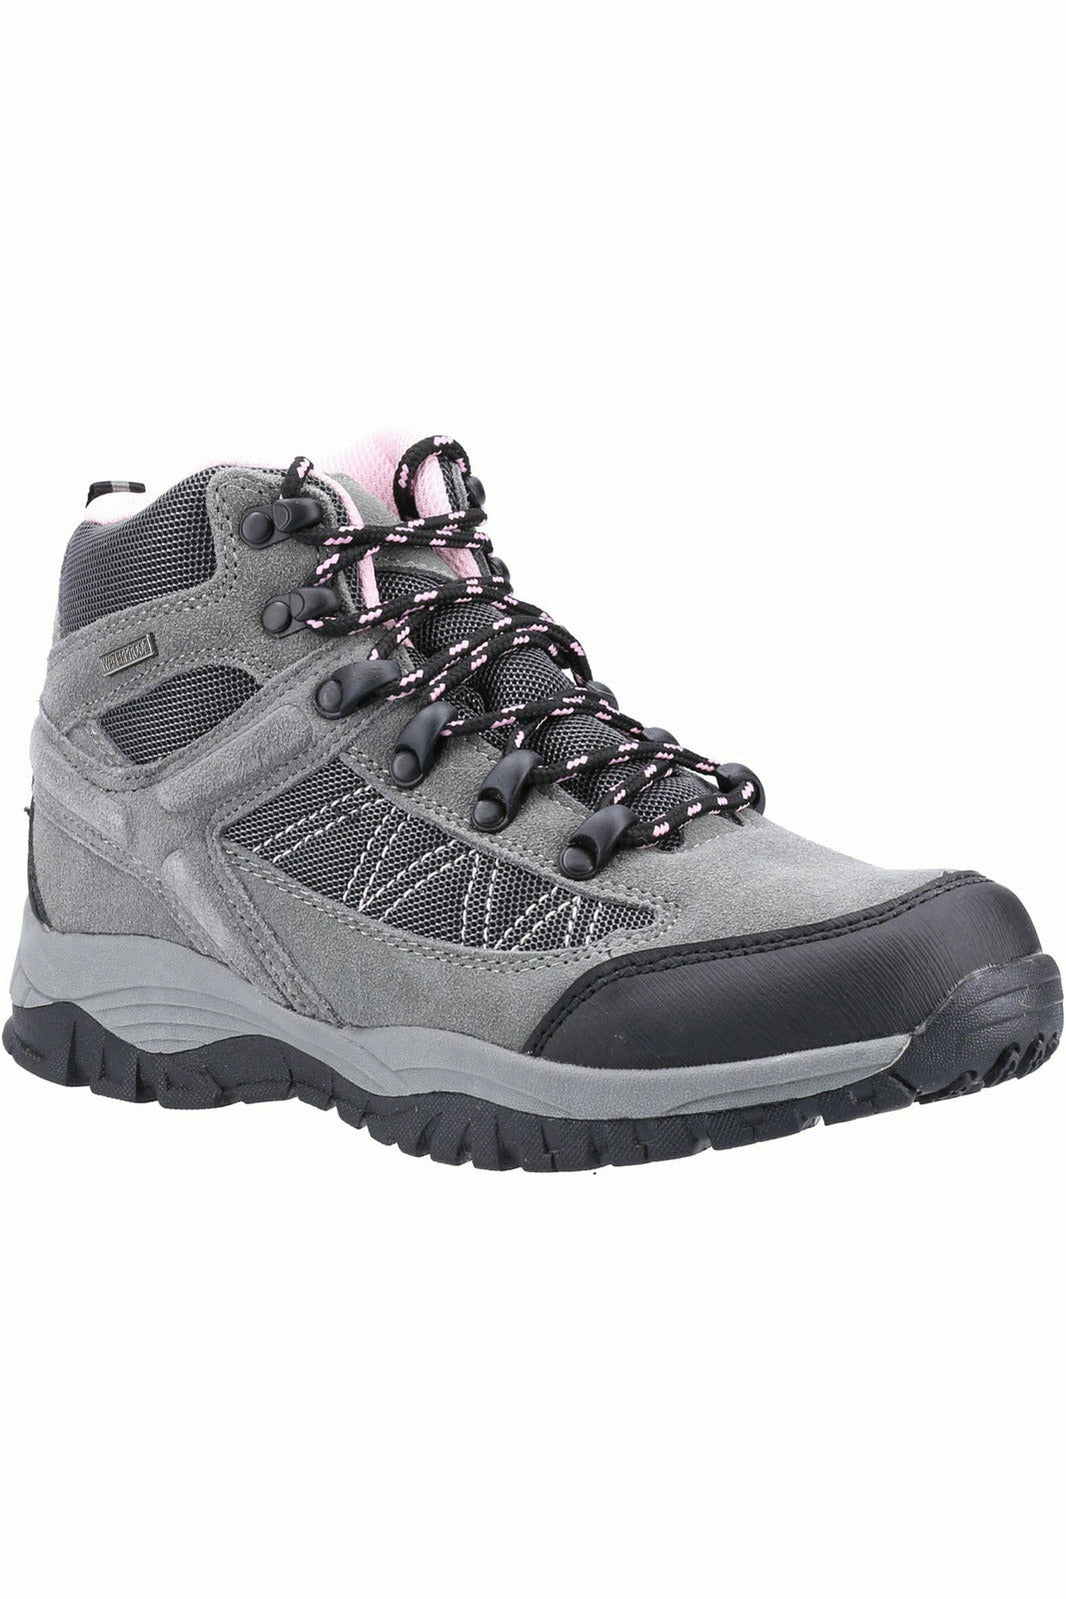 Cotswold - Maisemore Ladies Hiking Boot